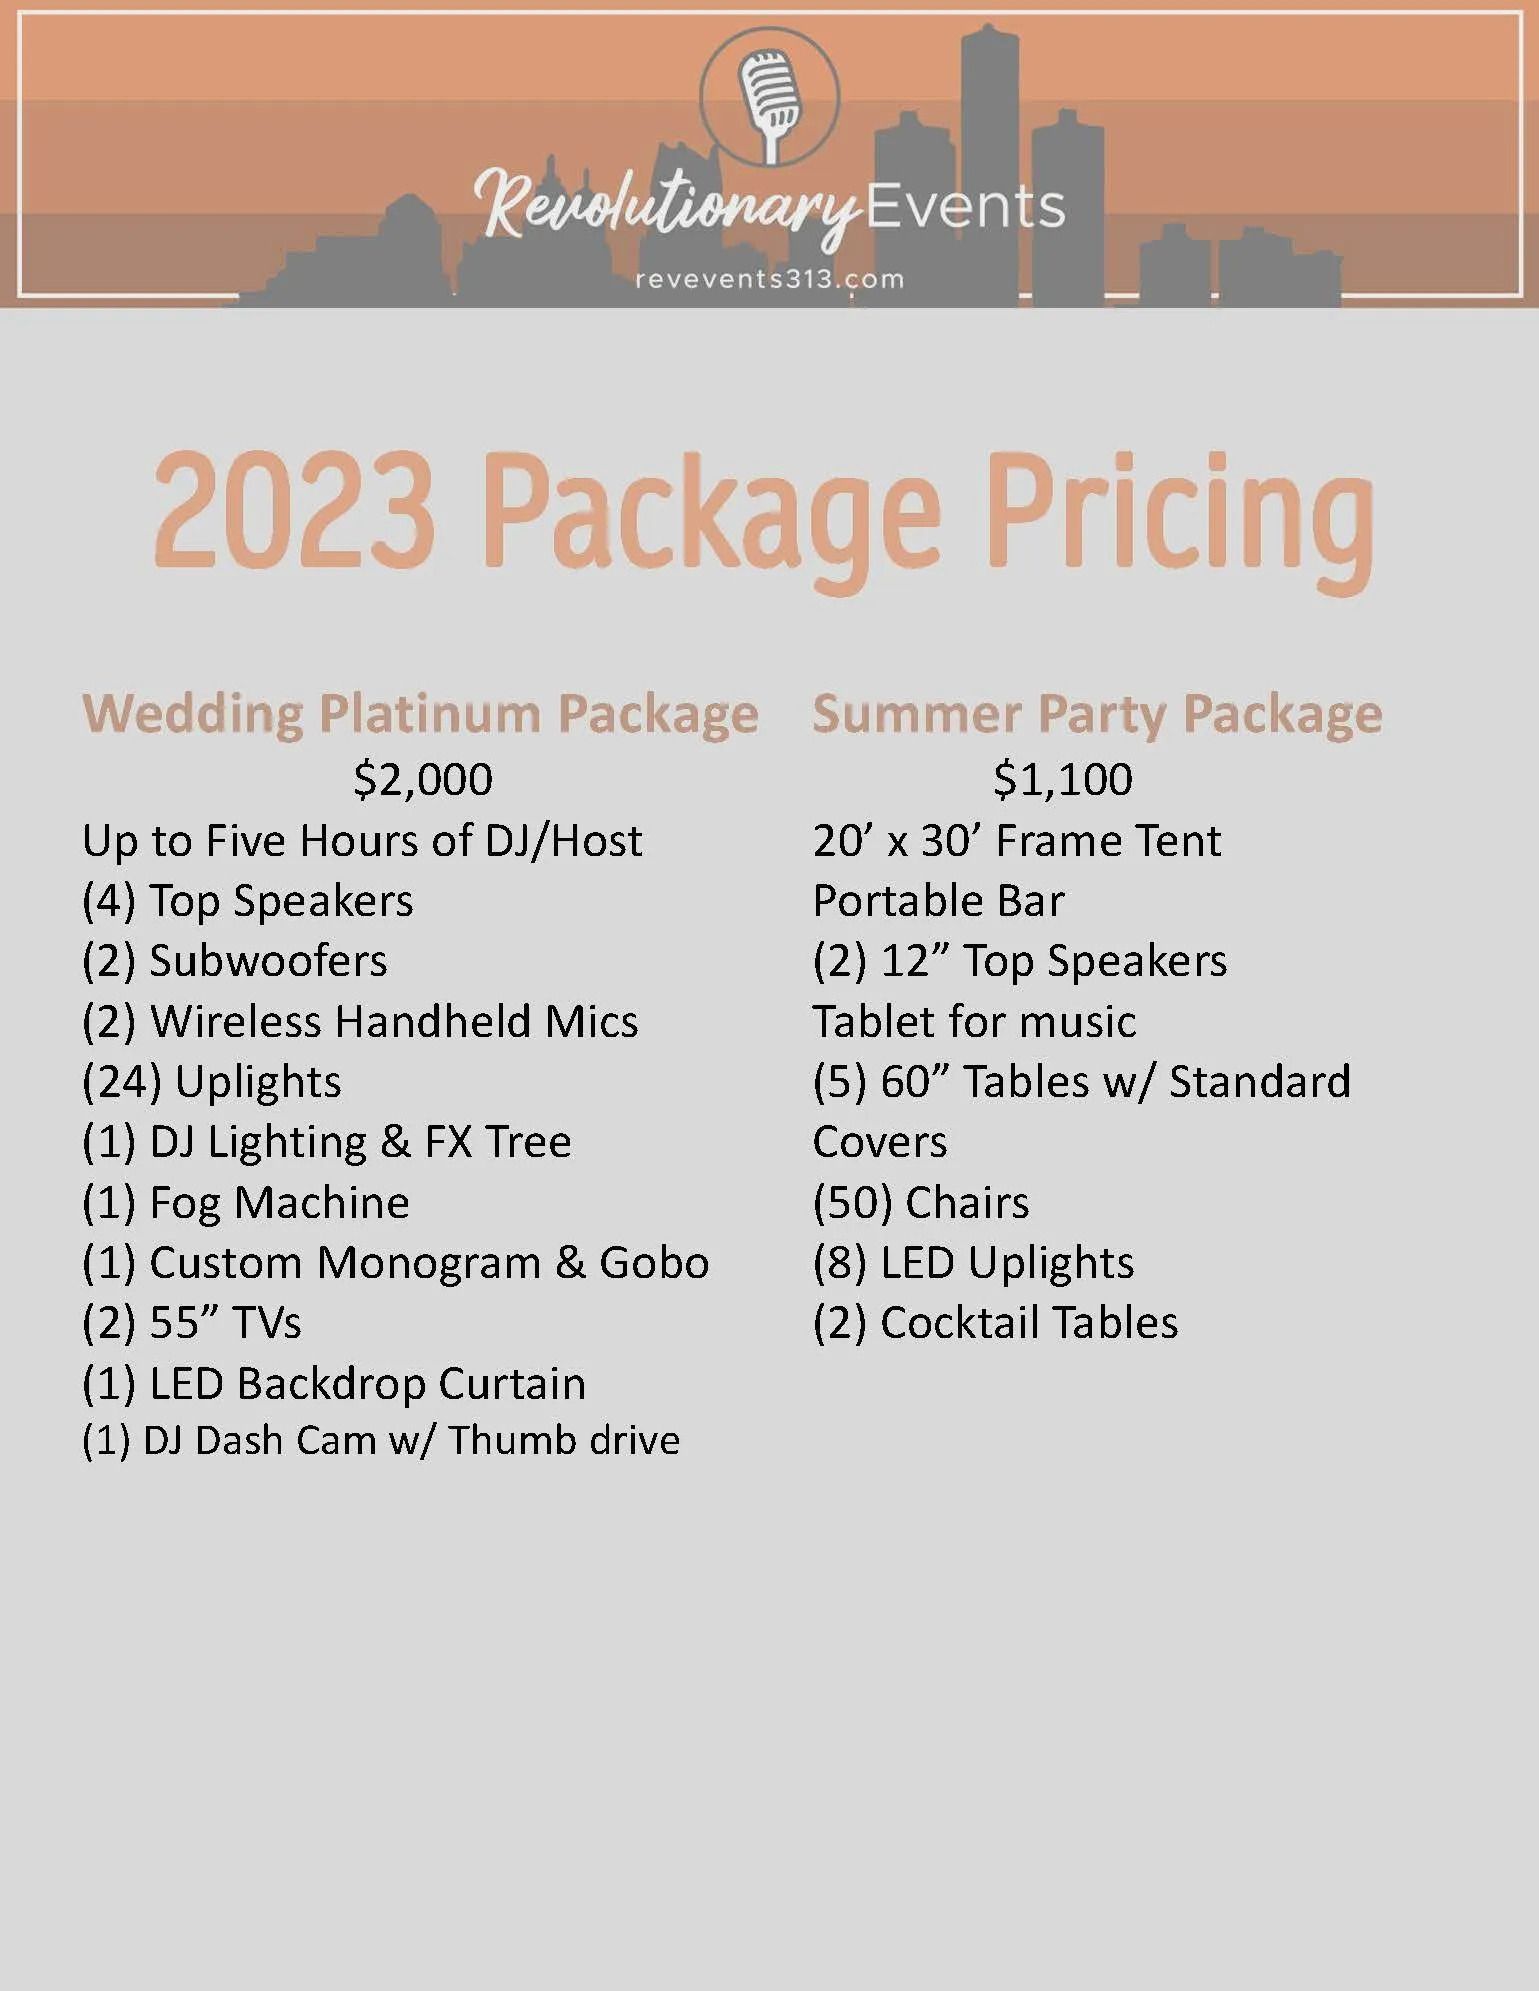 2023 Package Pricing